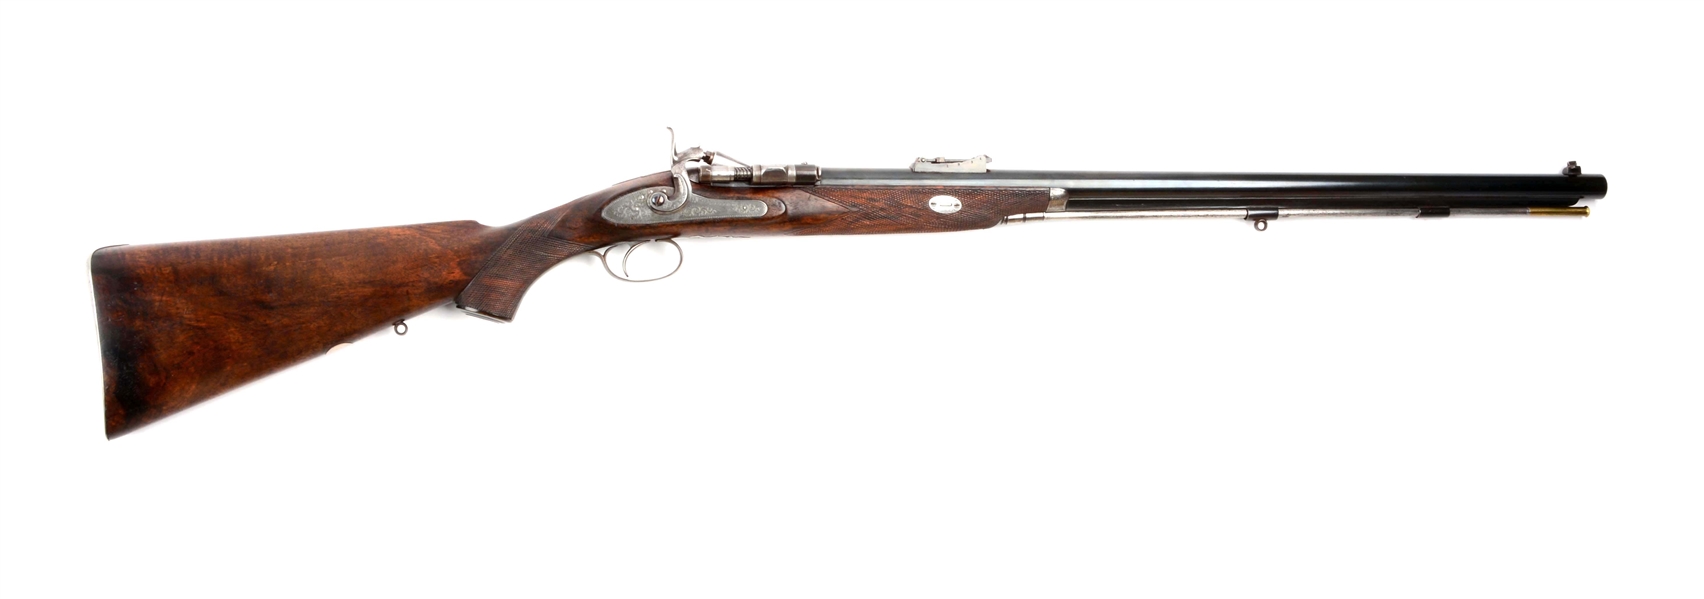 (A^) ENGLISH SNIDER COMMERCIAL SPORTING RIFLE BY HOLLIS & SONS.